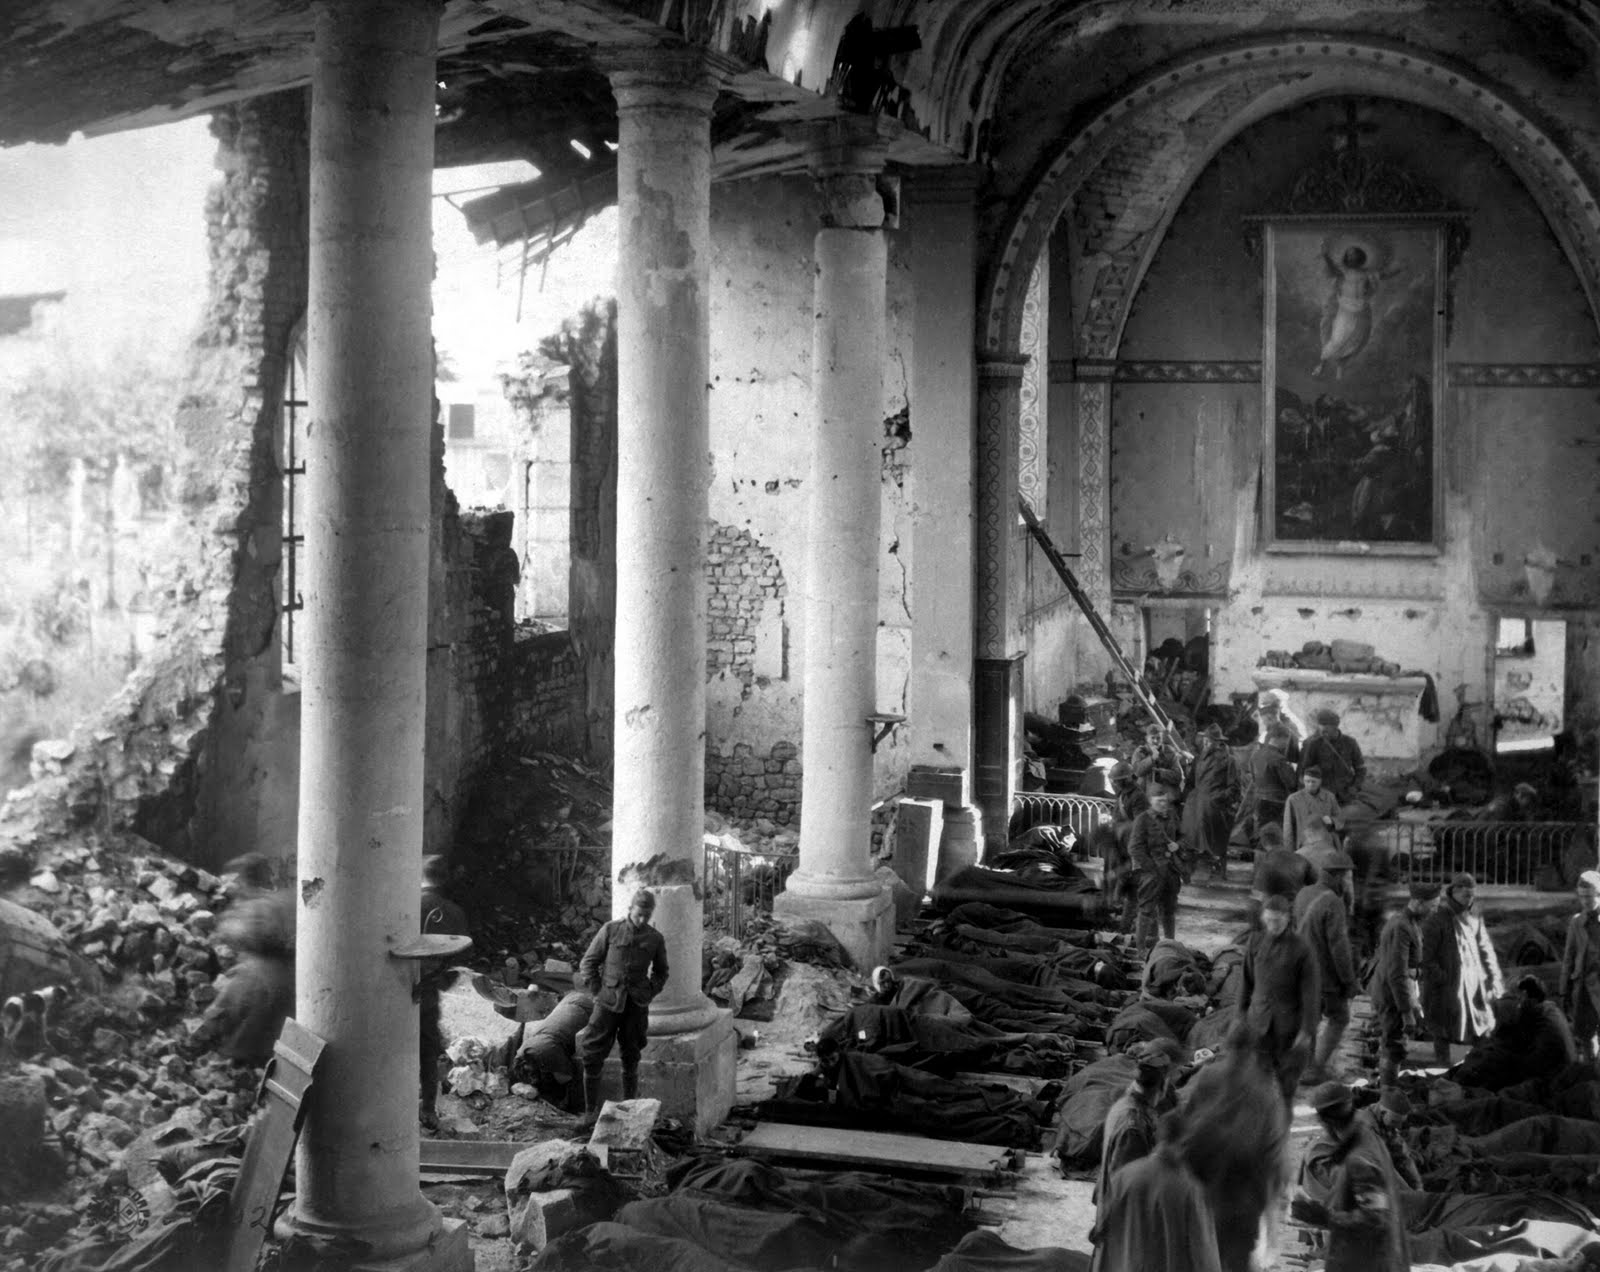 An American field hospital inside the ruins of a church in Neuvilly, France, 1918